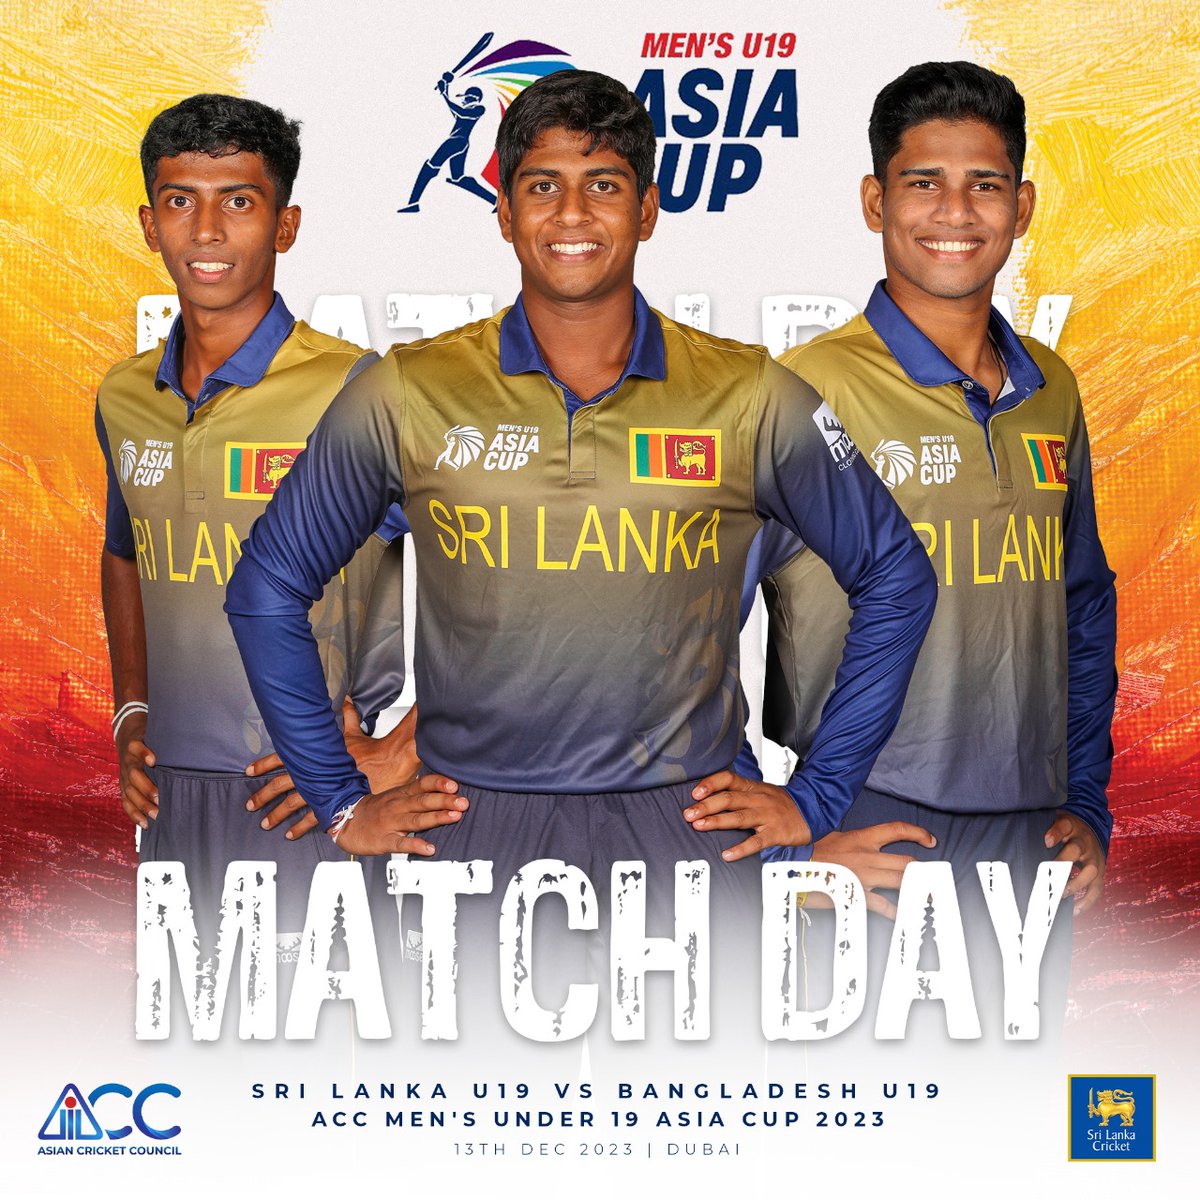 Sri Lanka U19s face off against Bangladesh U19s in the ACC Men's Under 19 Asia Cup. Match Starts at 11PM! #YoungLions #U19AsiaCup